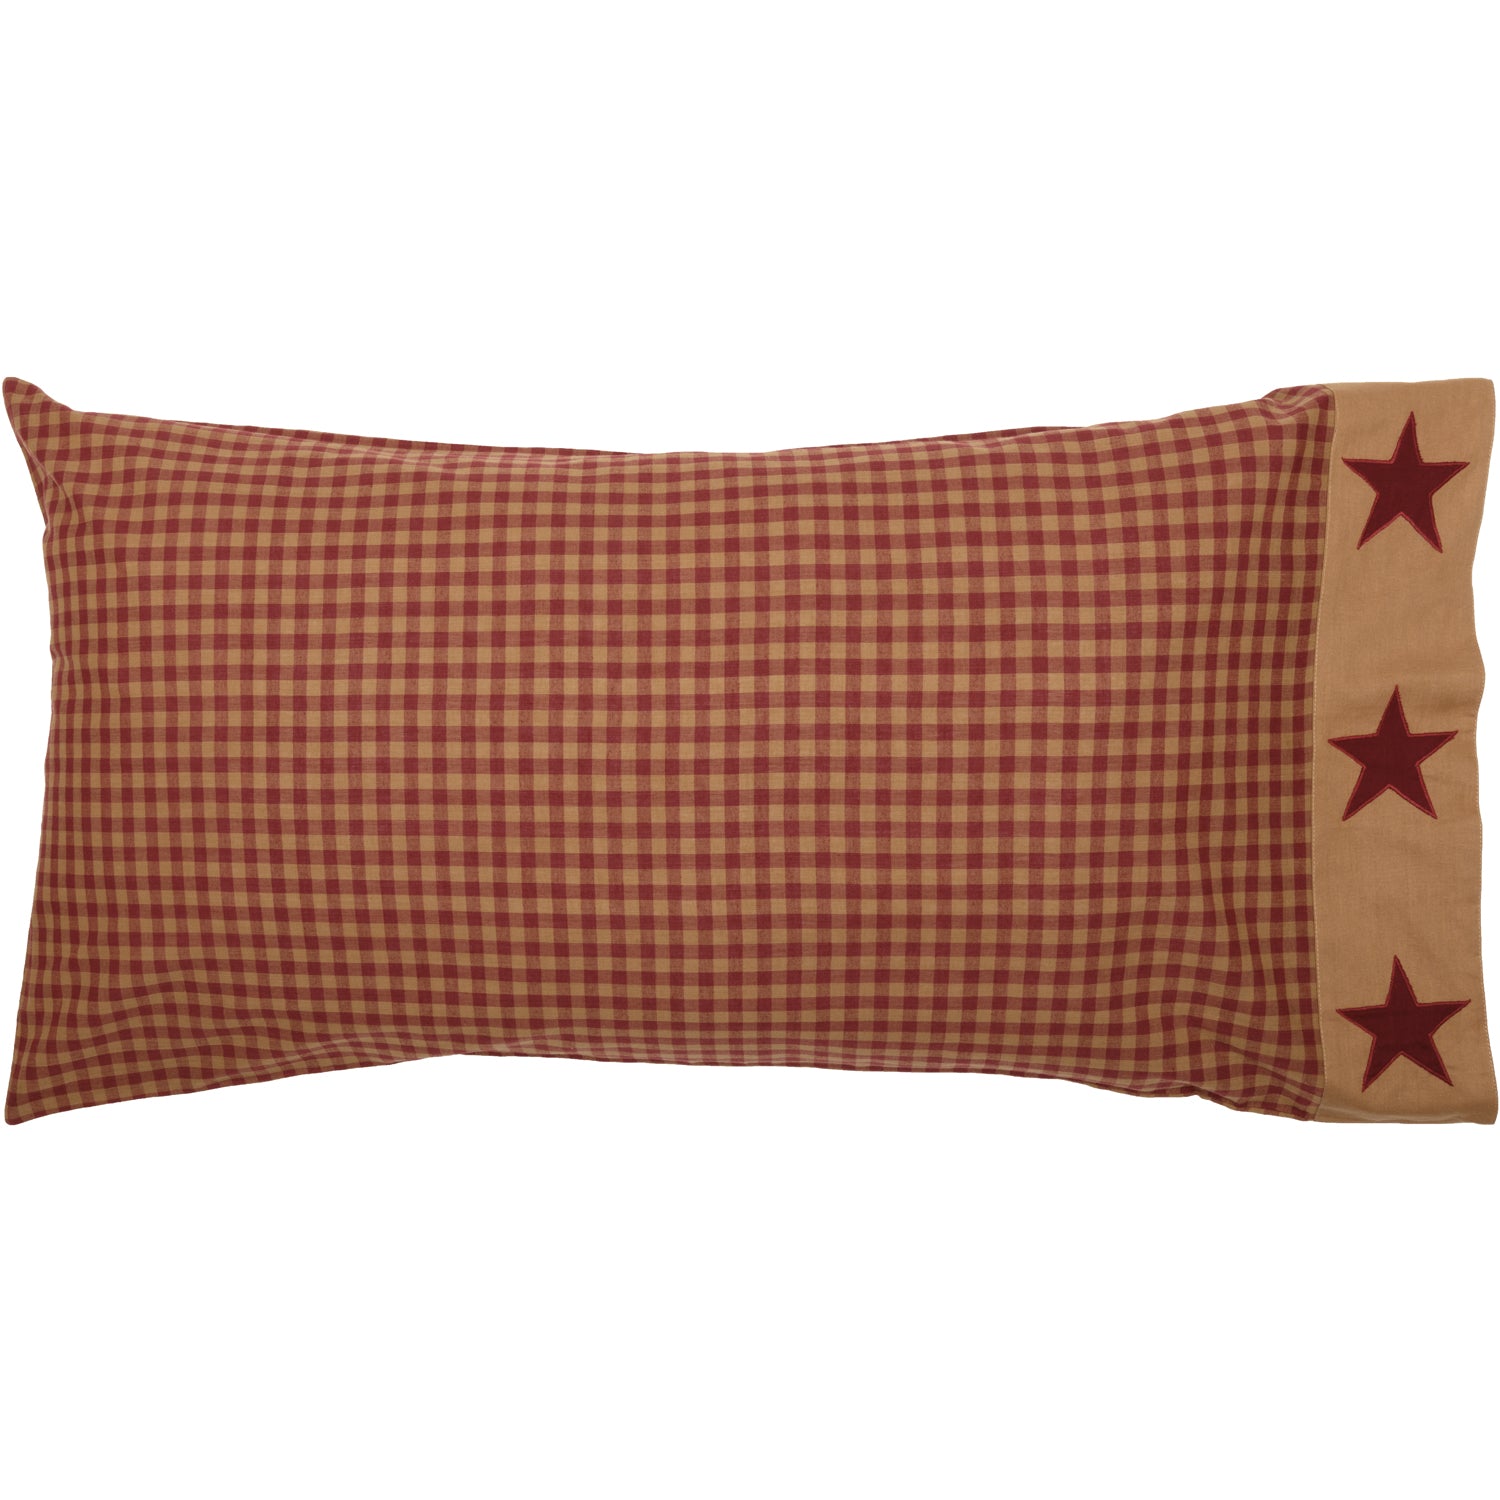 51249-Ninepatch-Star-King-Pillow-Case-w-Applique-Border-Set-of-2-21x40-image-5